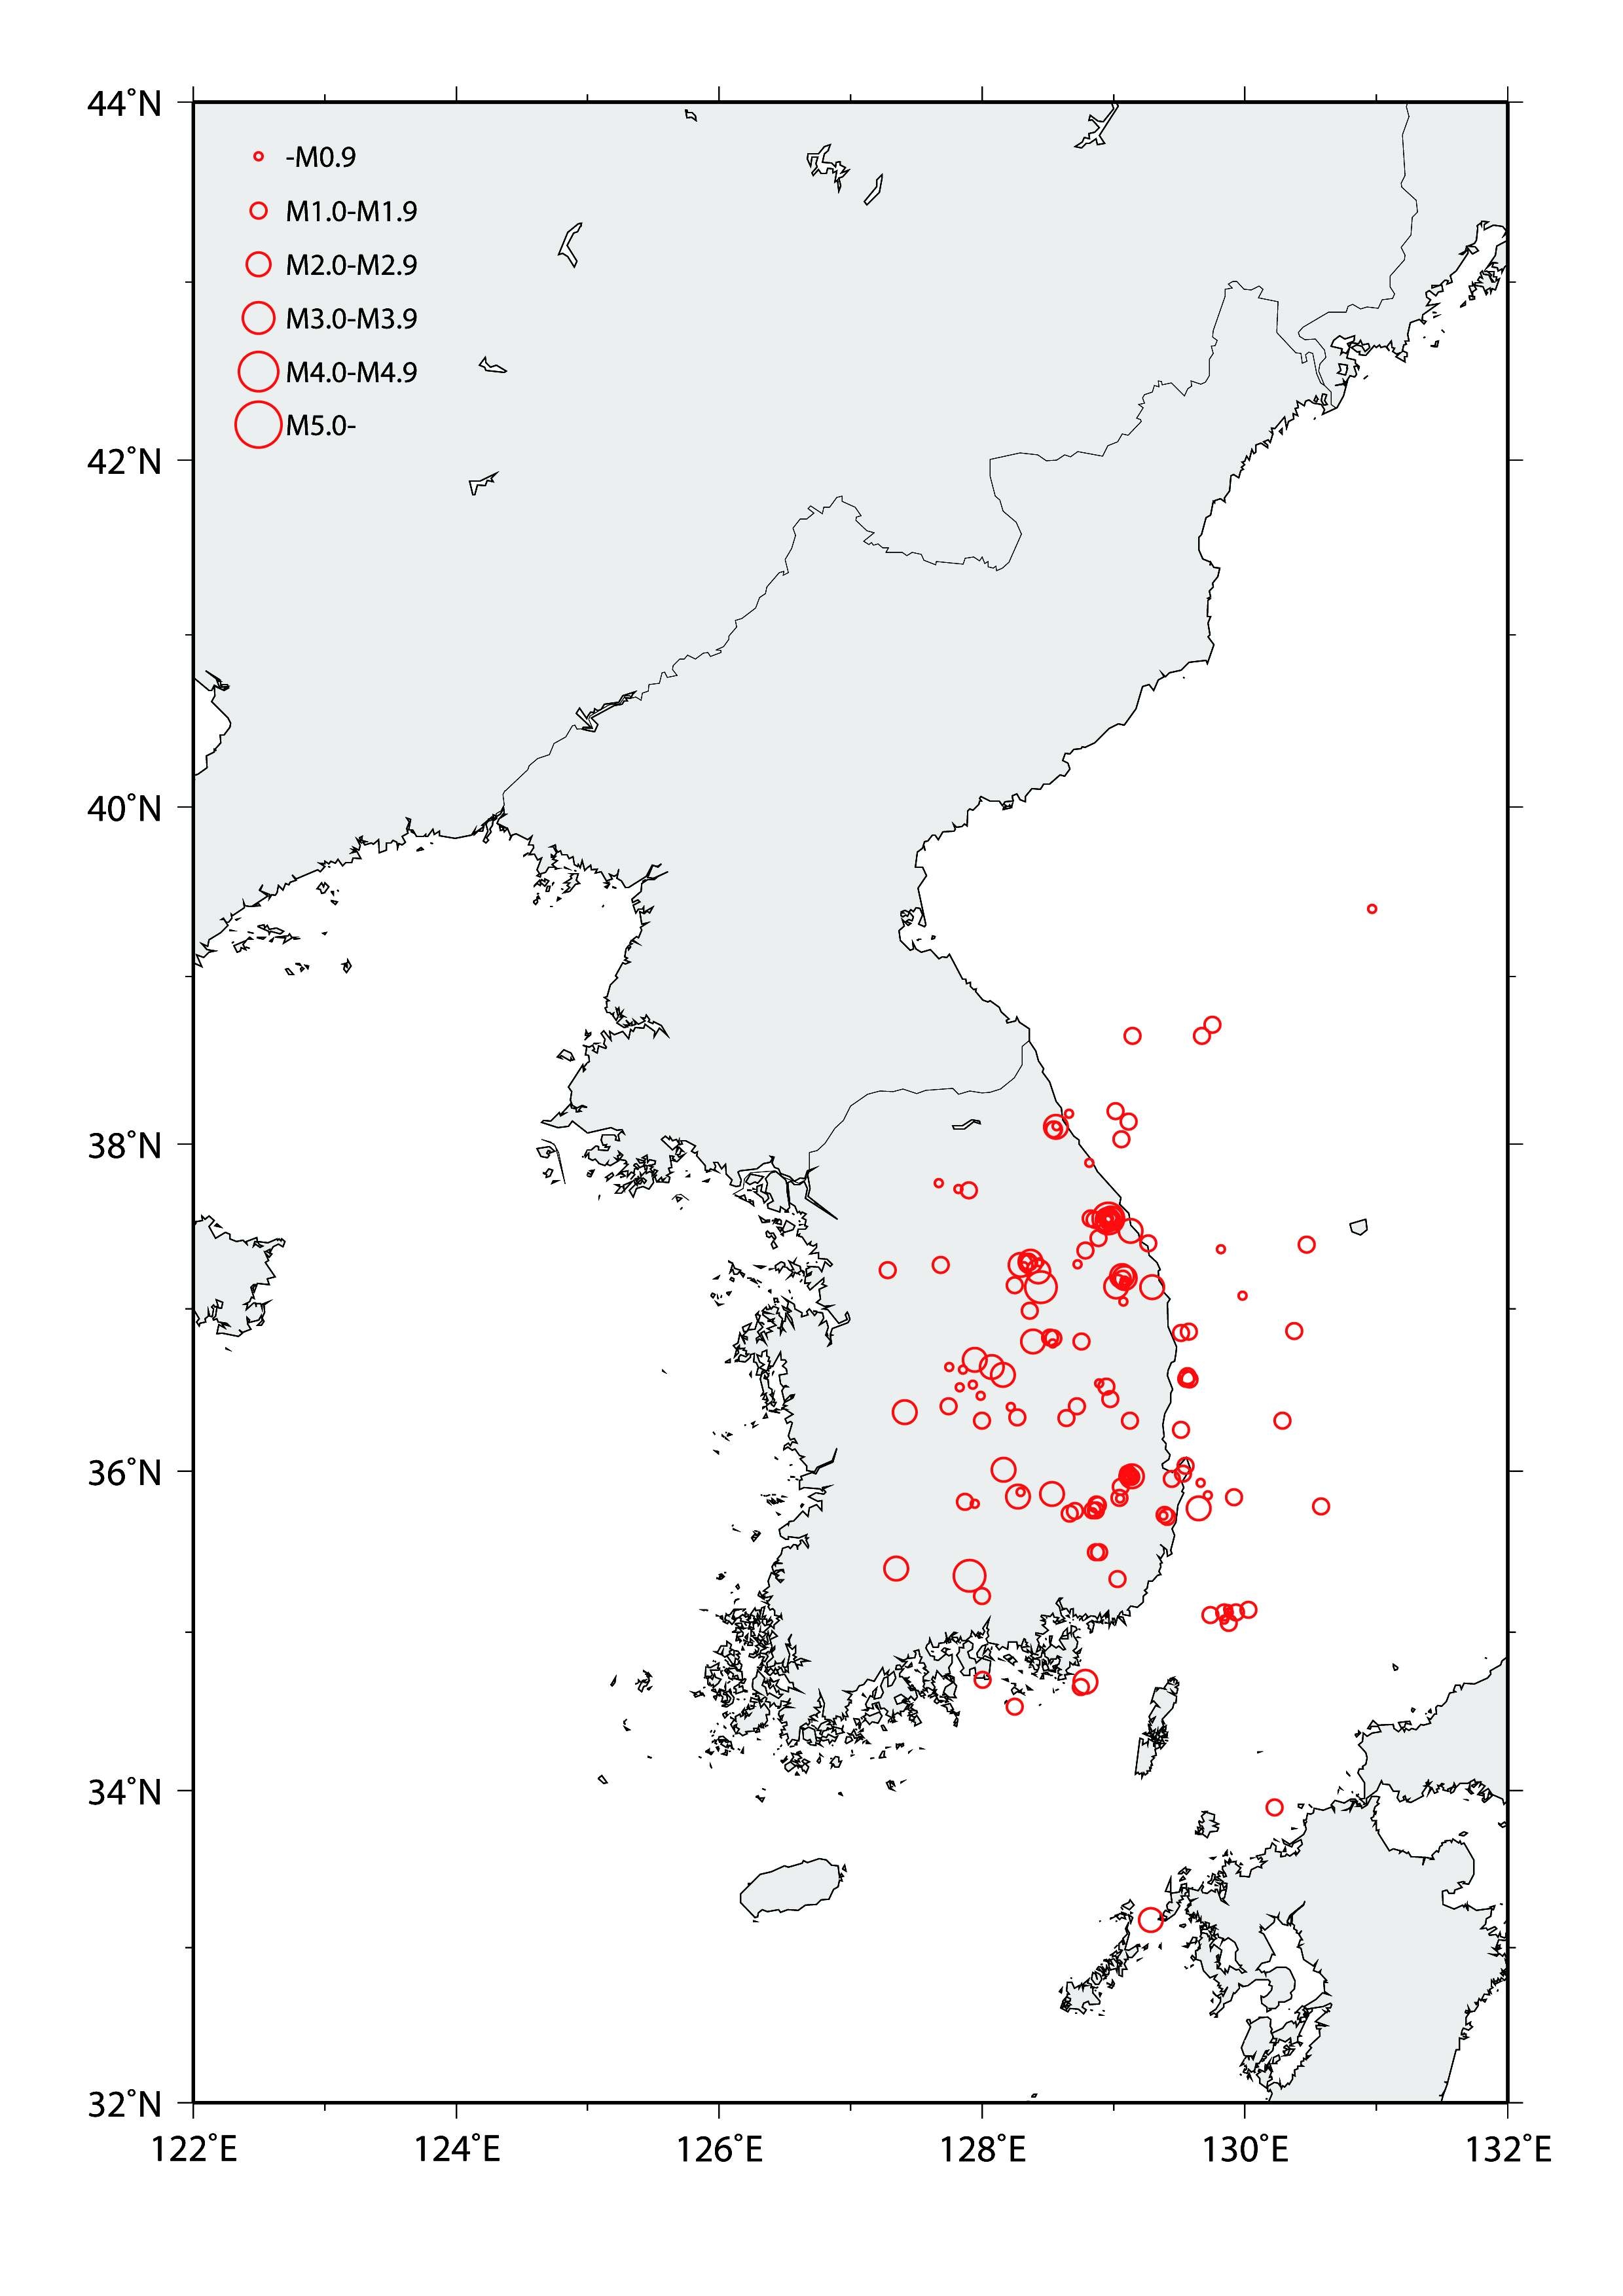 Fig. 2.1.2 Distribution of earthquakes in the Korean Peninsula between October 2011 and April 2012.